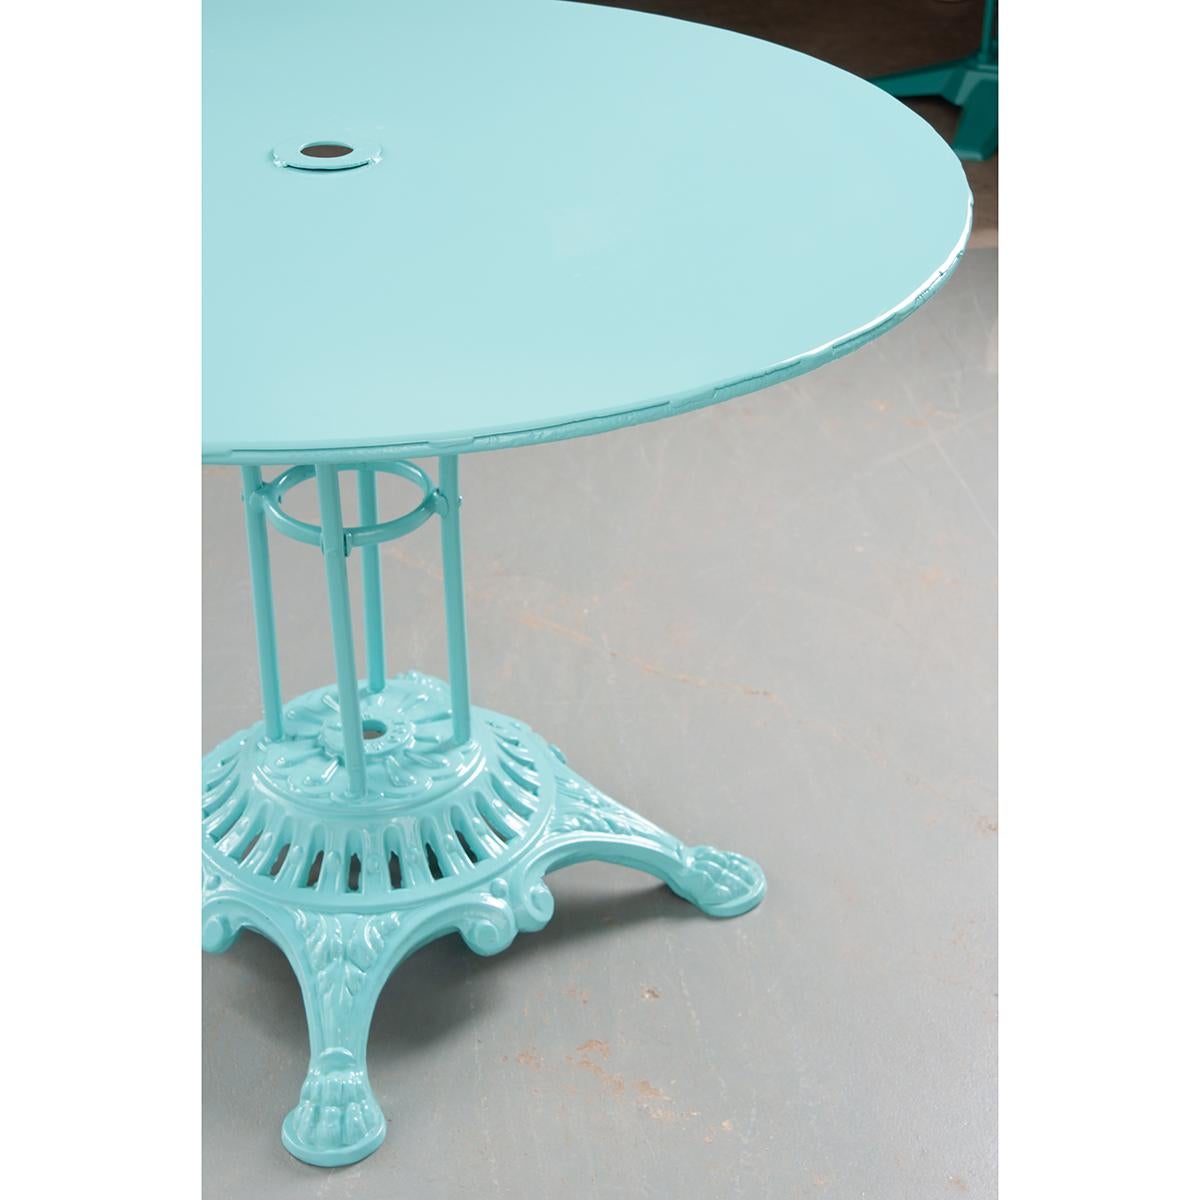 French Vintage Metal Garden Table In Good Condition For Sale In Baton Rouge, LA